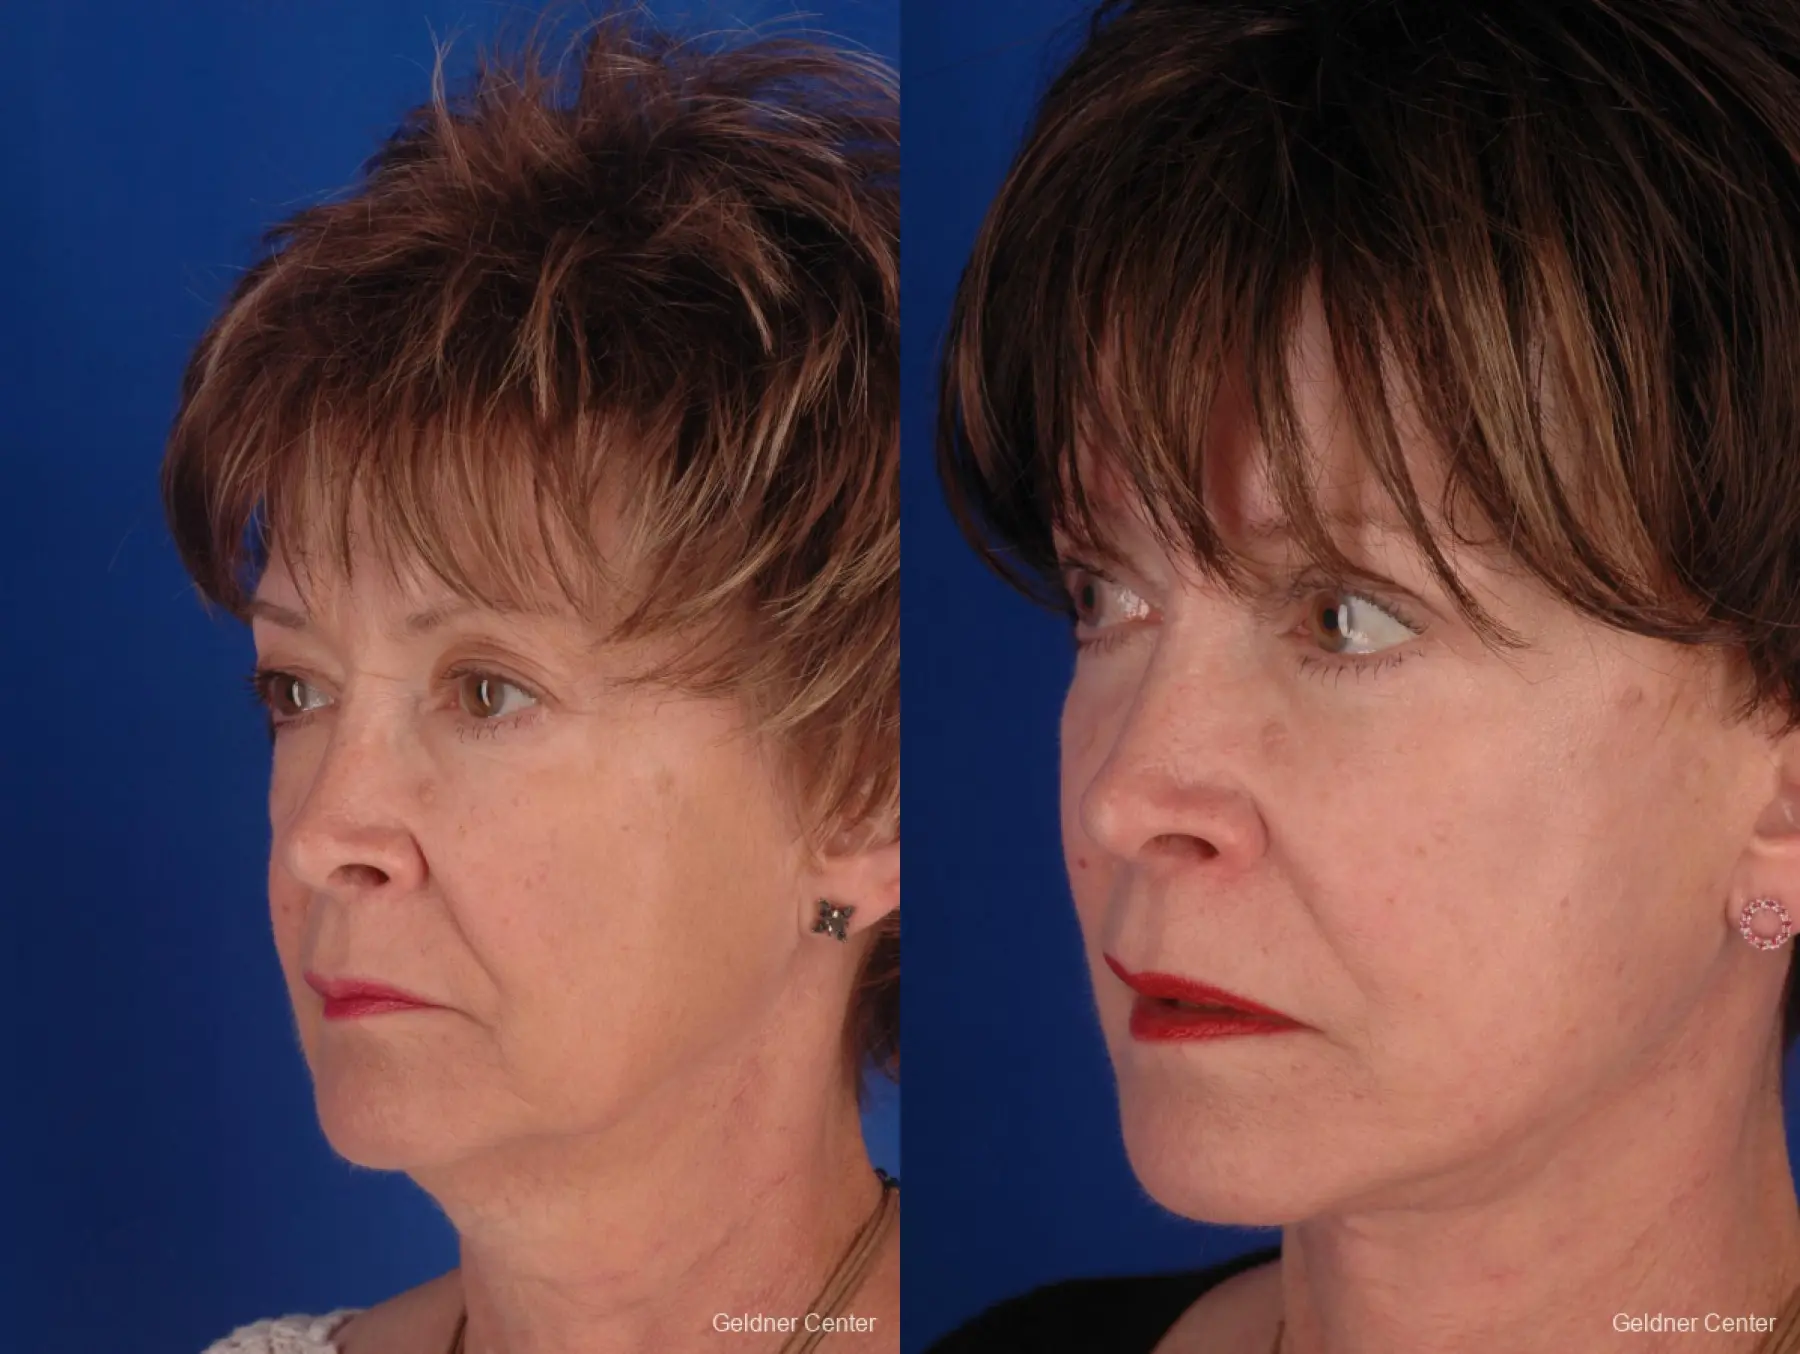 59 year old woman, upper and lower lid blepharoplasty - Before and After 5